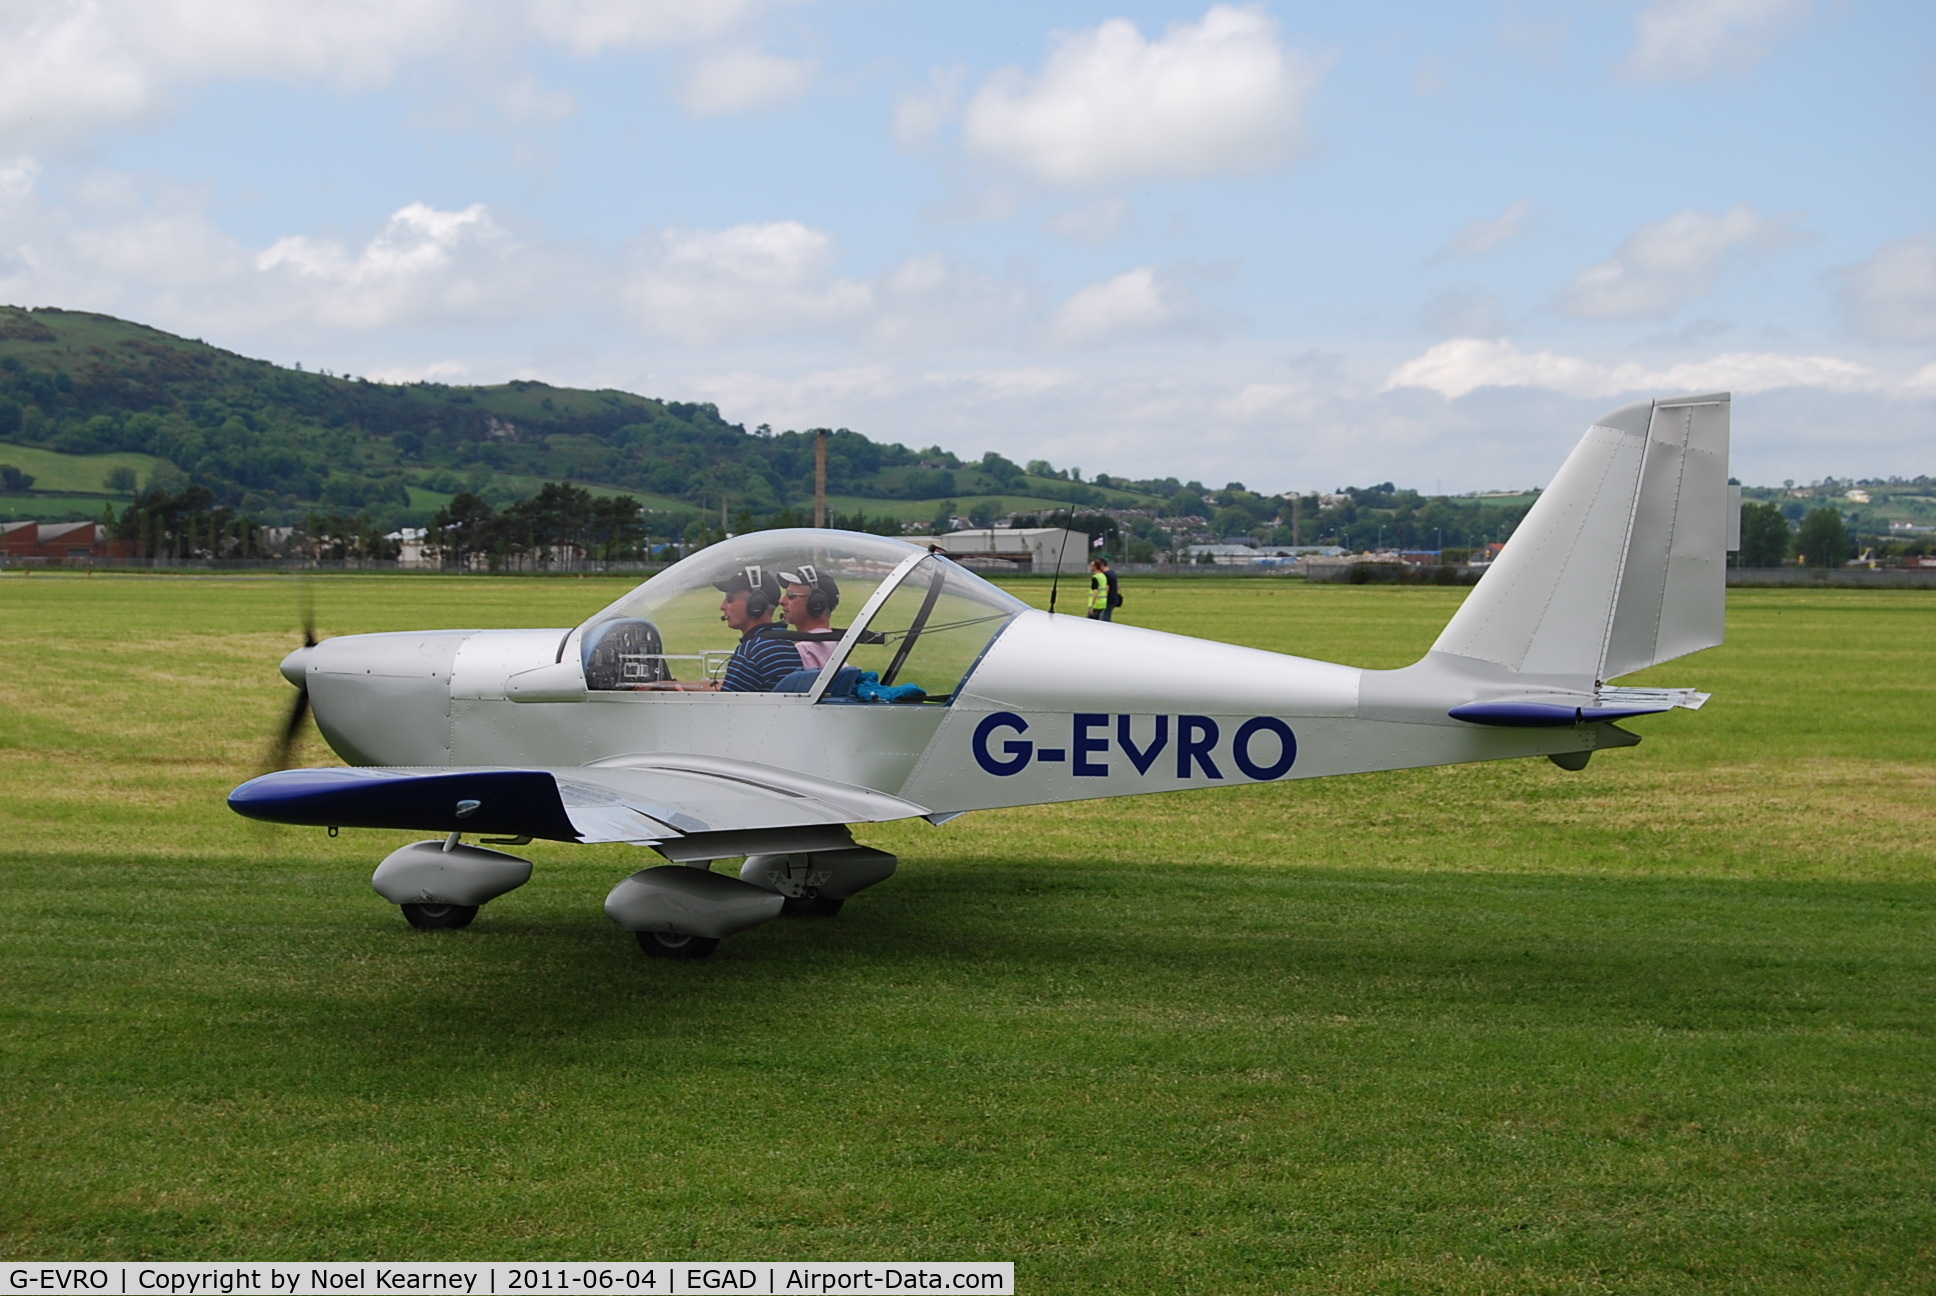 G-EVRO, 2004 Aerotechnik EV-97 Eurostar C/N PFA 315-14137, Taxi-ing to the parking area, at the Newtownards fly-in.